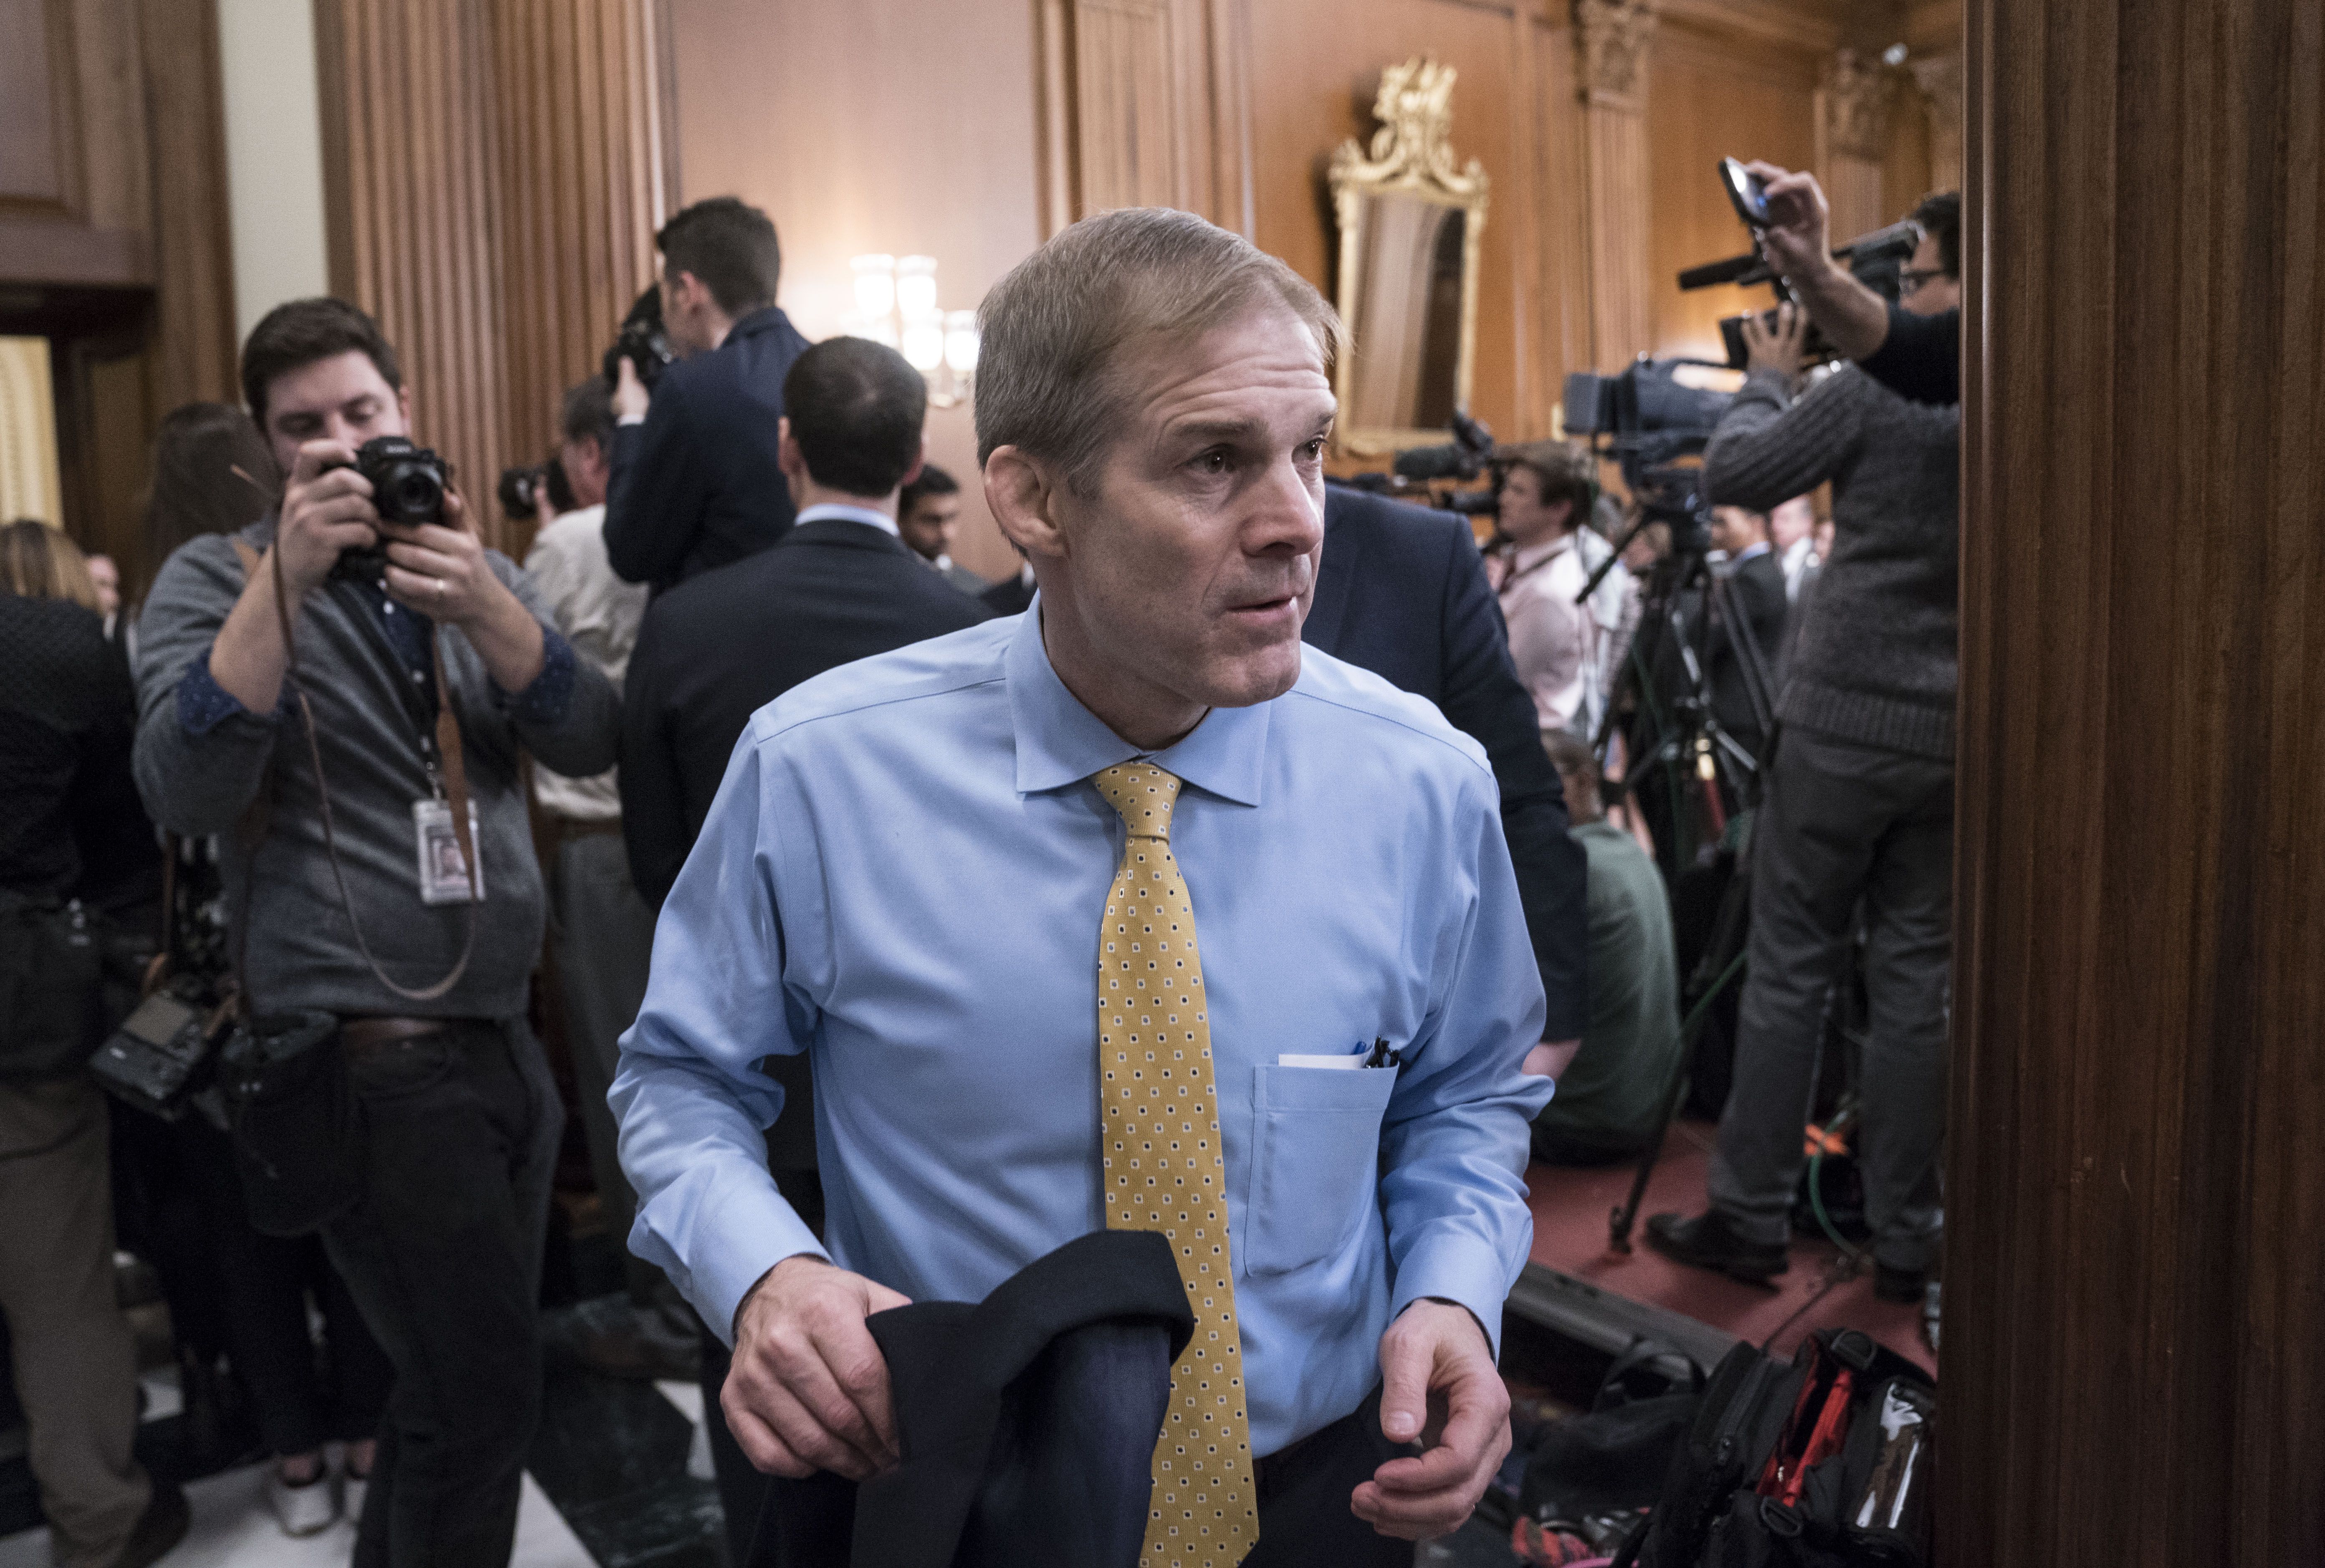 ep. Jim Jordan, (R-OH) is seen following the House of Representatives vote to impeach President Donald Trump on December 18